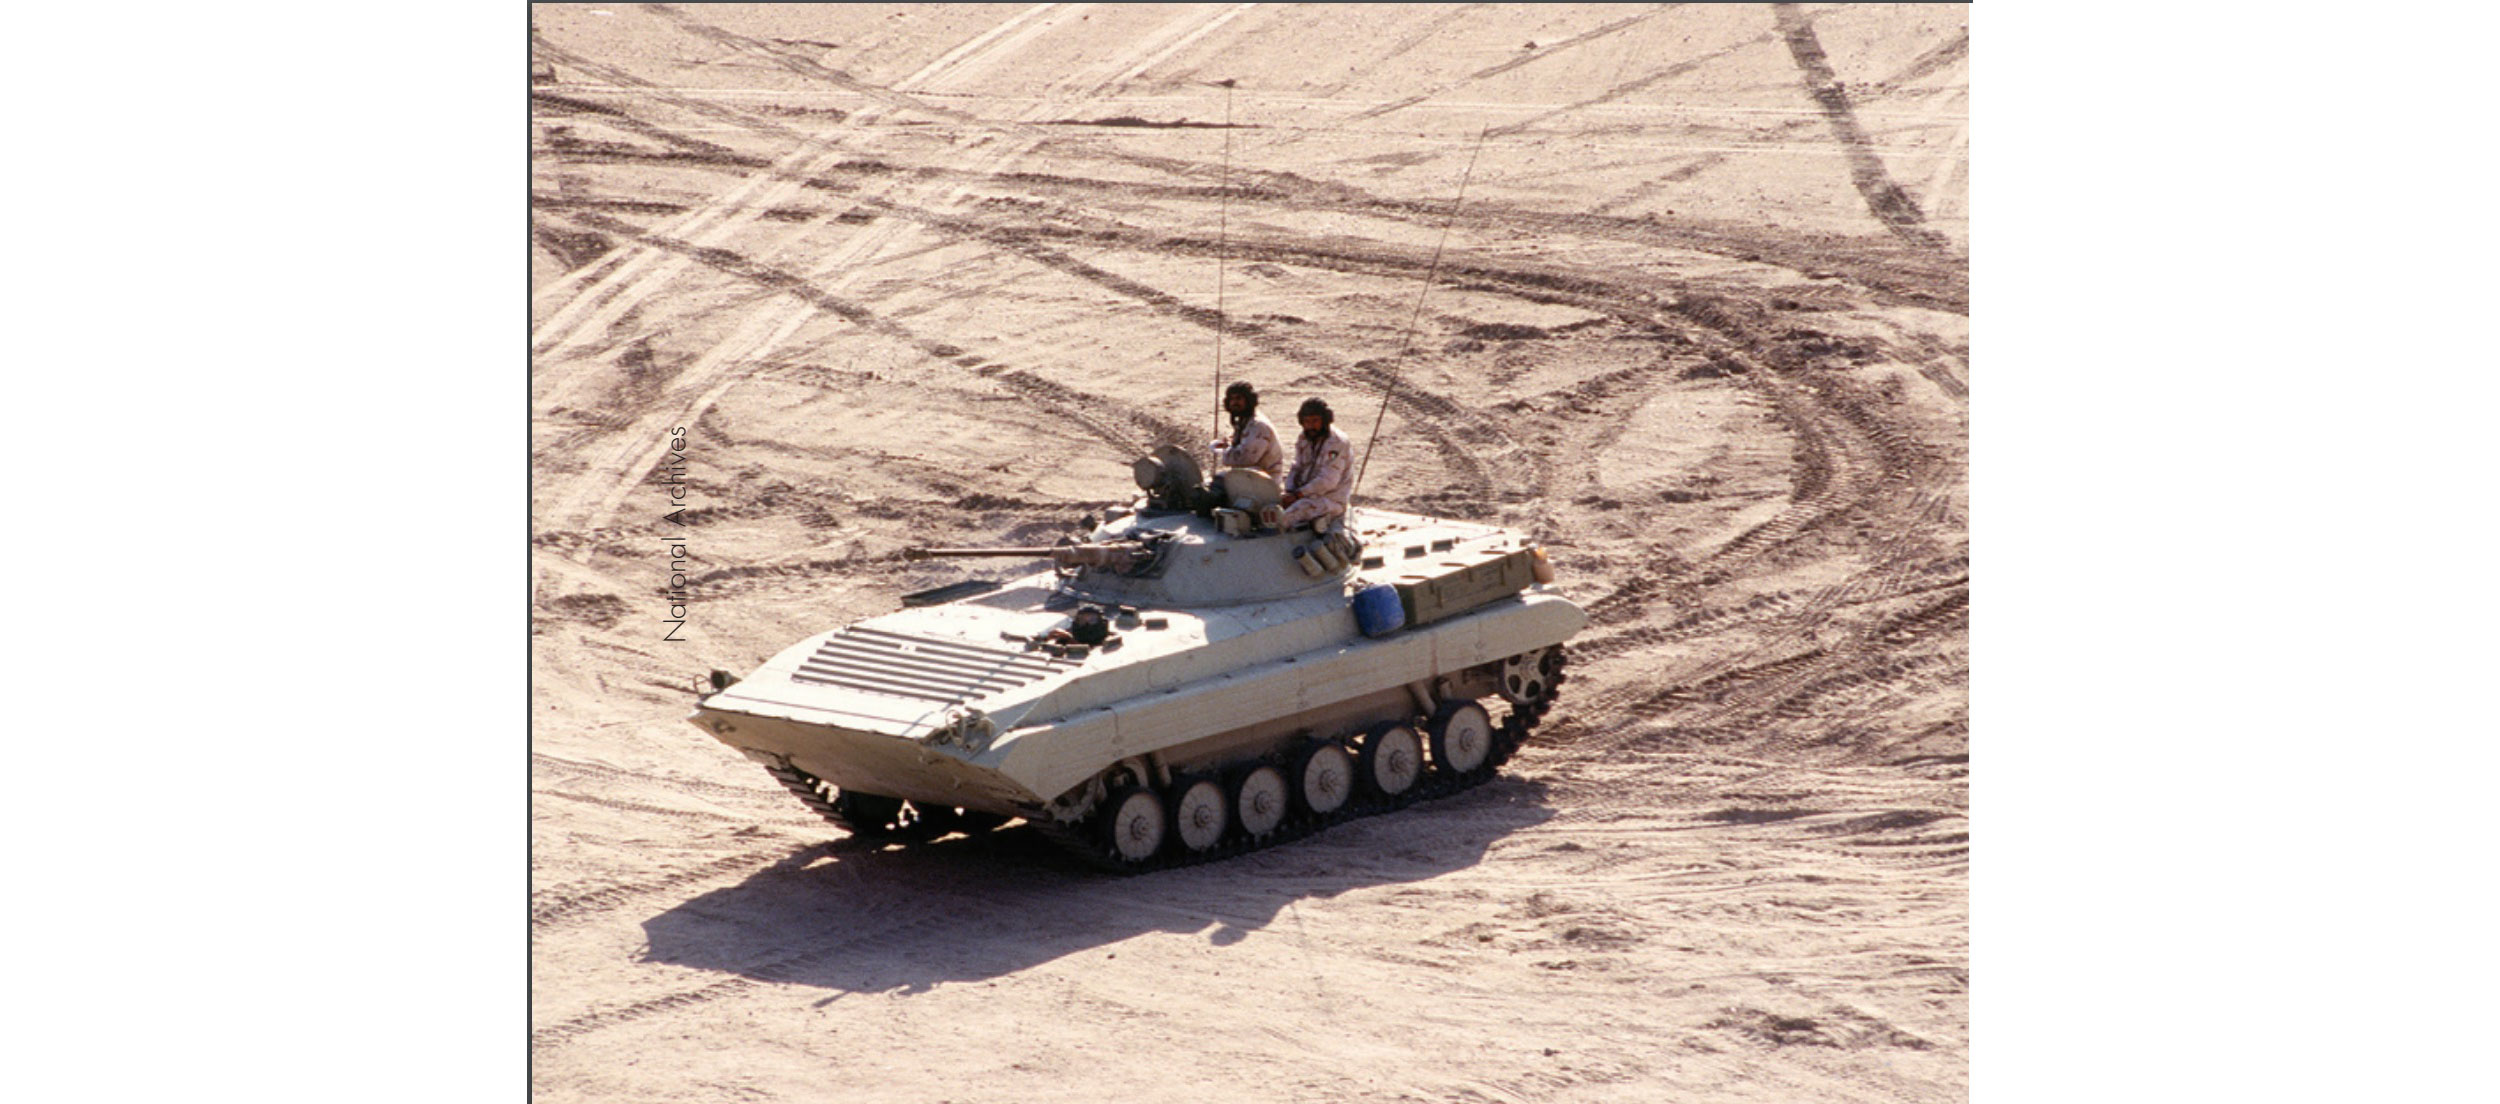 Overhead shot of a Kuwaiti Army BMP–2 infantry fighting vehicle taking part in Operation Vigilant Warrior.